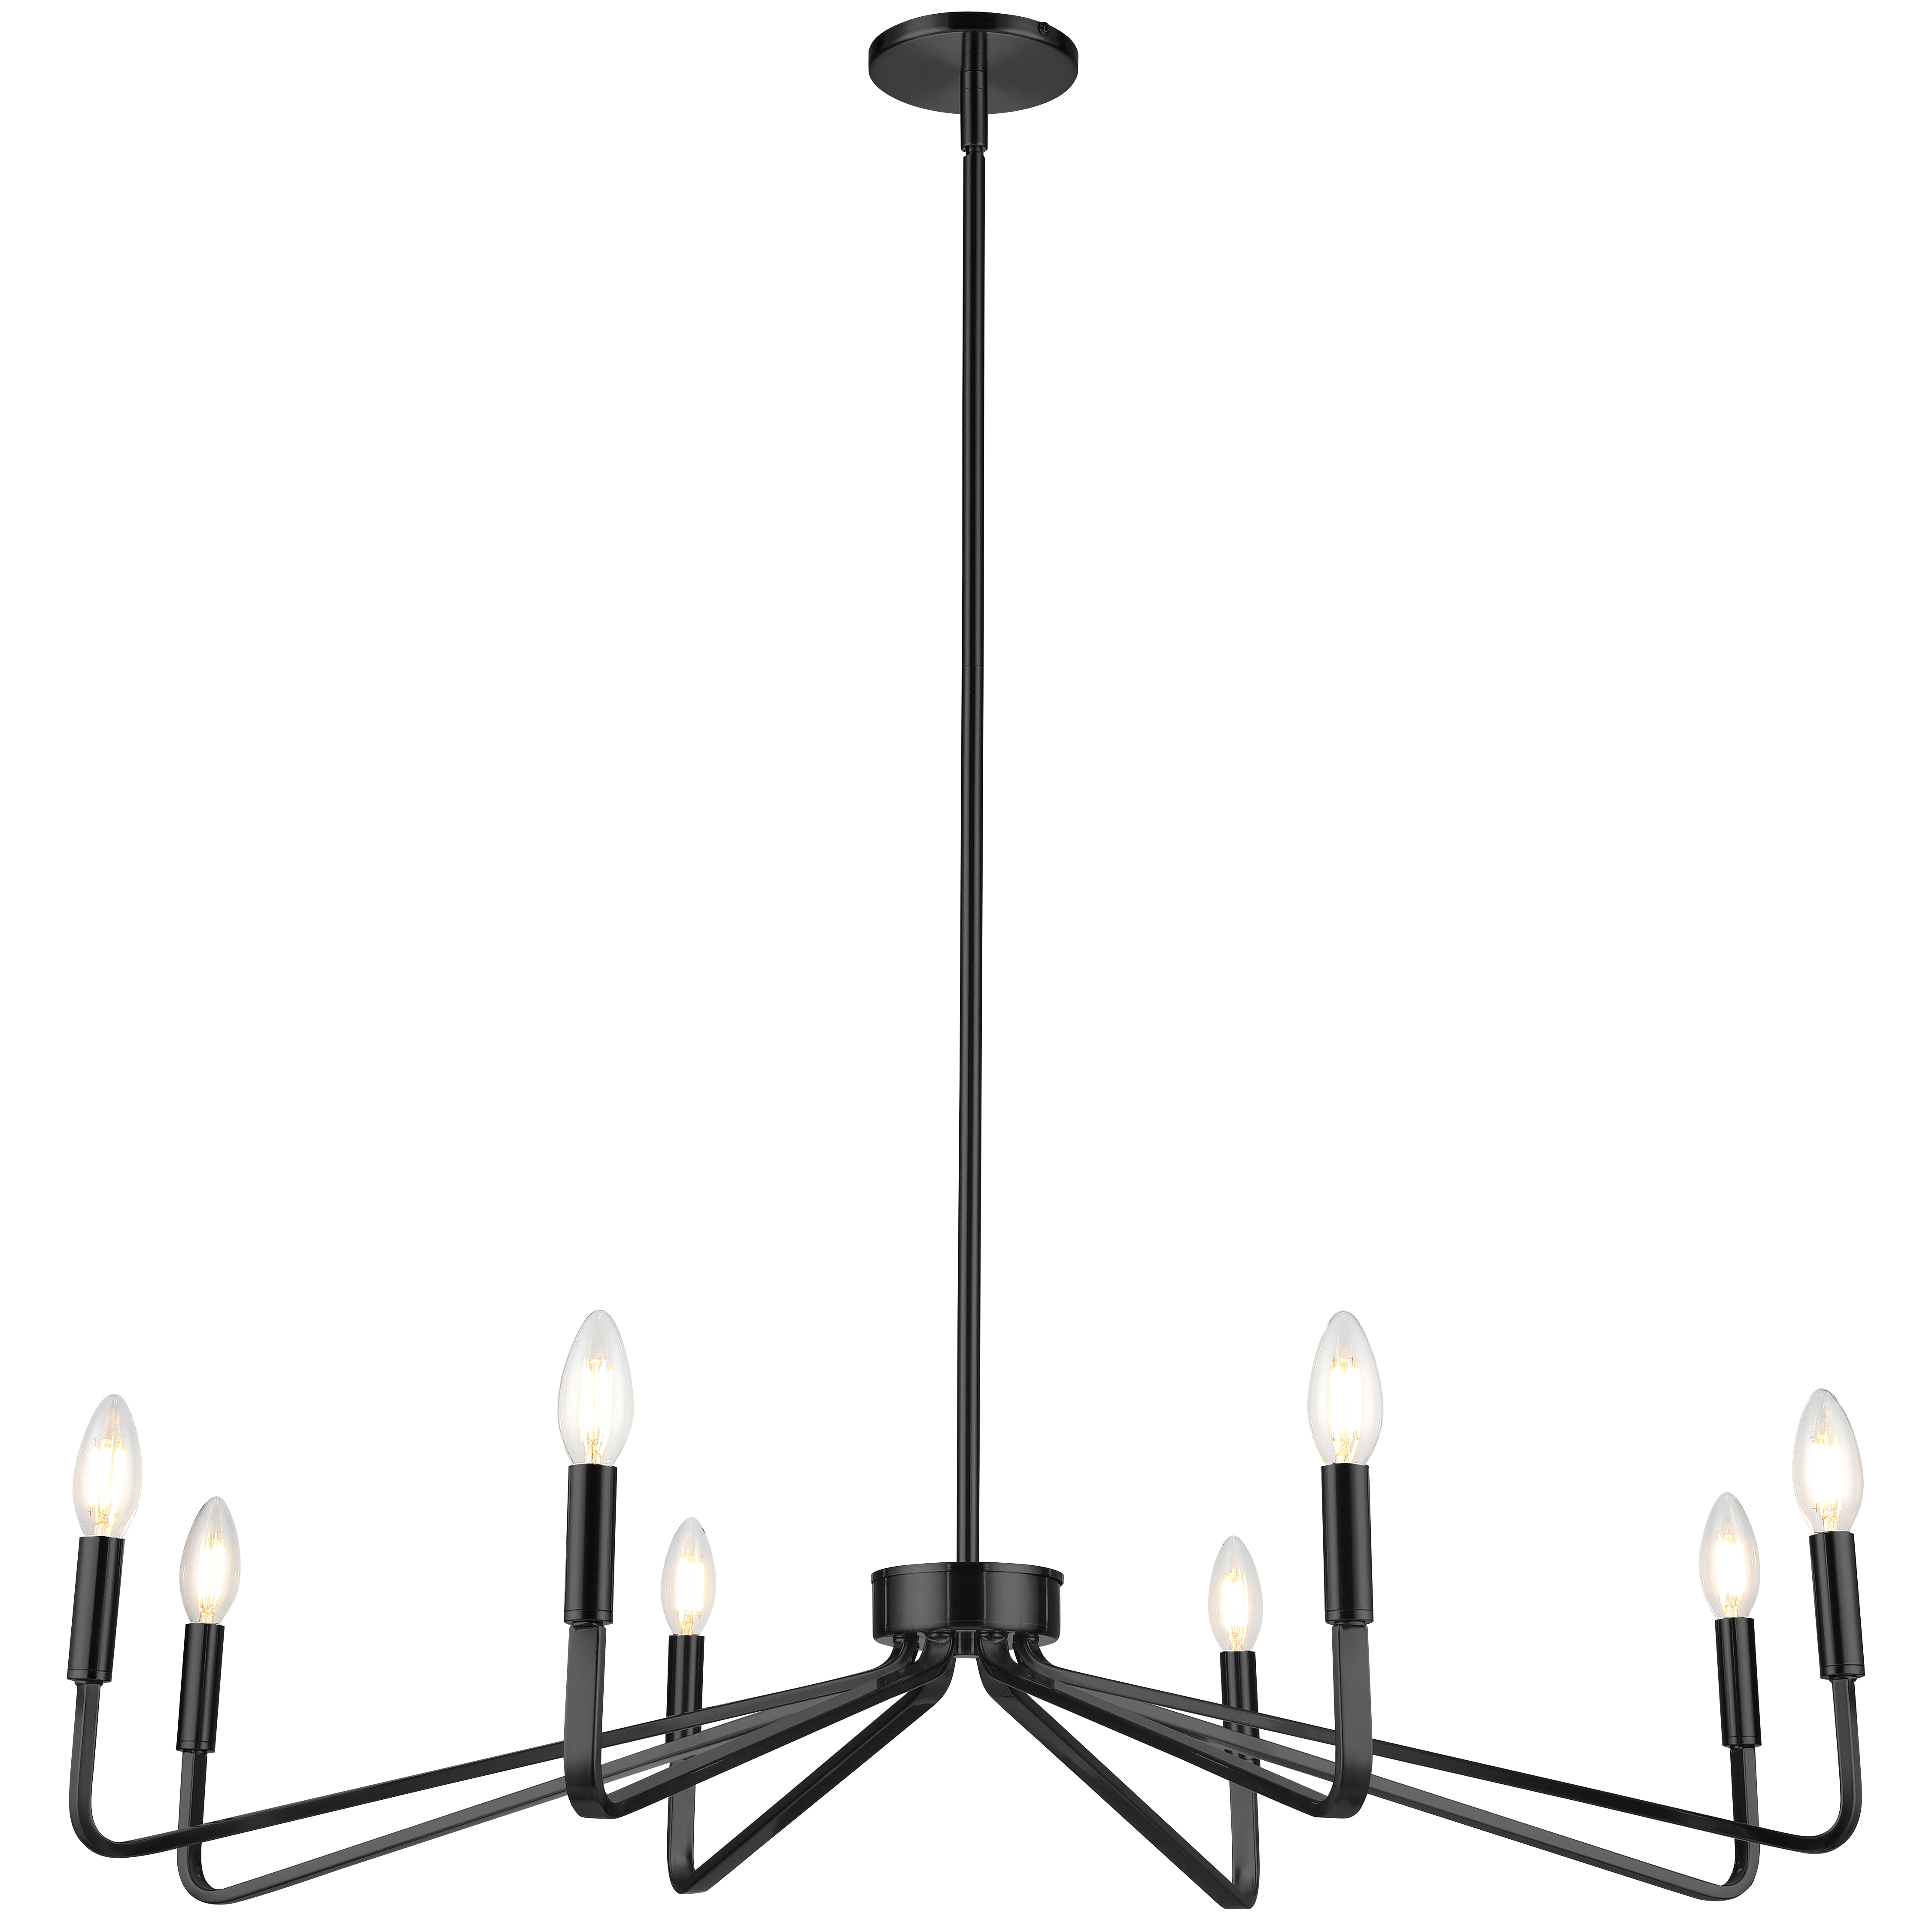 The traditional chandelier design gets a thoroughly modern makeover in the Clayton family of lighting. Straight lines and gleaming metal make a definitive statement in cutting edge glamour.  A metal drop and frame comes in a choice of finish, contrasting or complementing white incandescent bulbs in the traditional candle shape. The frame places the bulbs in a symmetrical, one-sided pattern perfect for placement against a wall.  It's a look that complements a fashionable dining room, kitchen, or even a hallway.